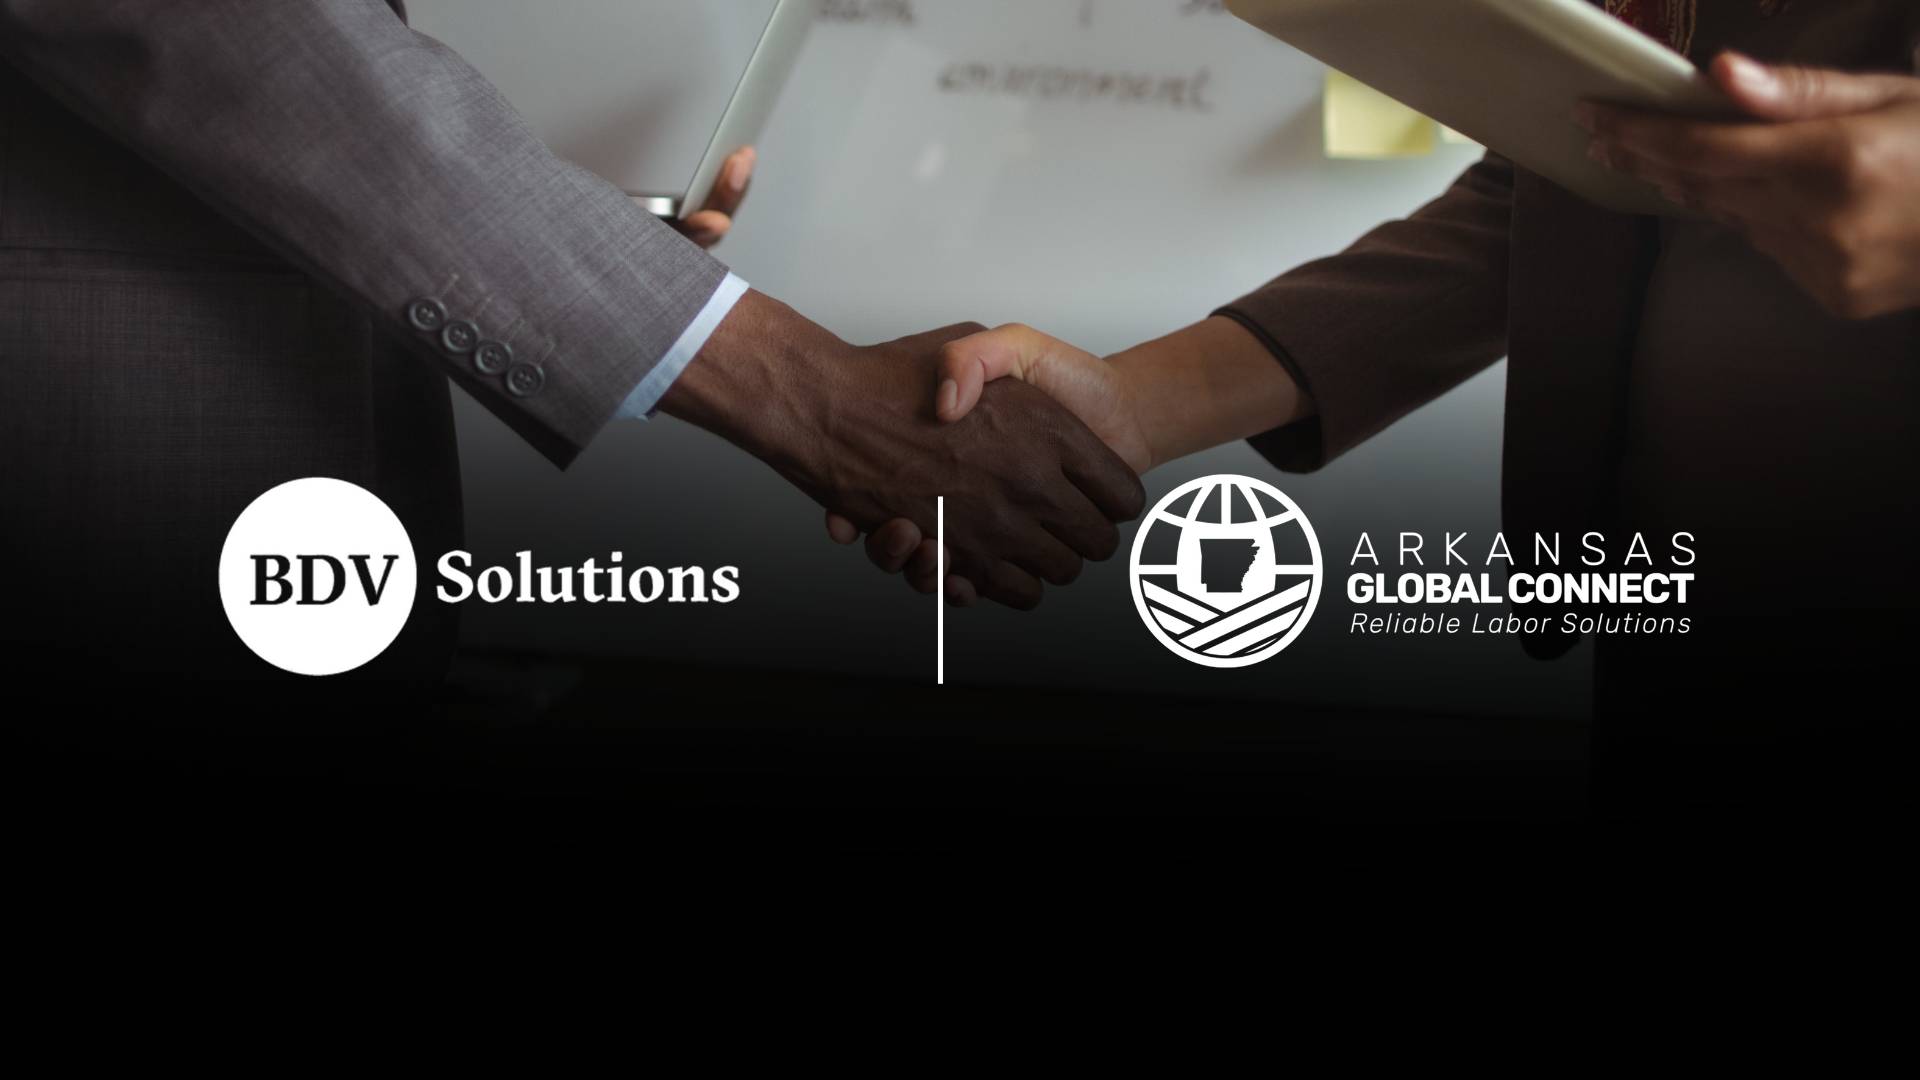 BDV Solutions Acquires Arkansas Global Connect to Expand Seasonal Labor Offerings